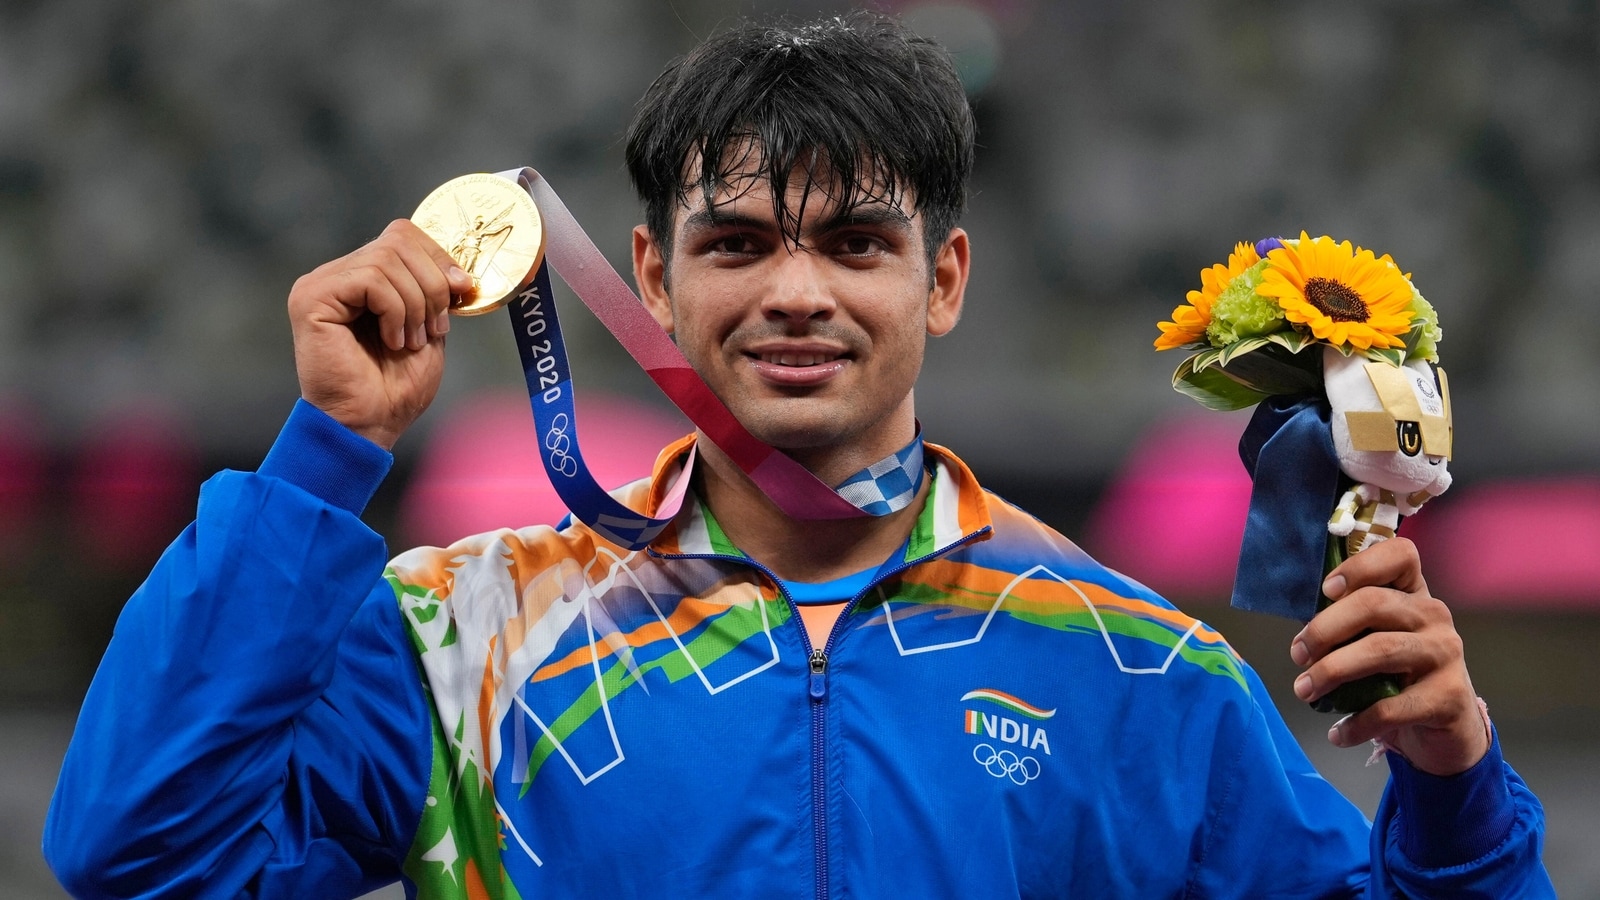 It's unbelievable': Neeraj Chopra reacts after historic gold at Tokyo Olympics